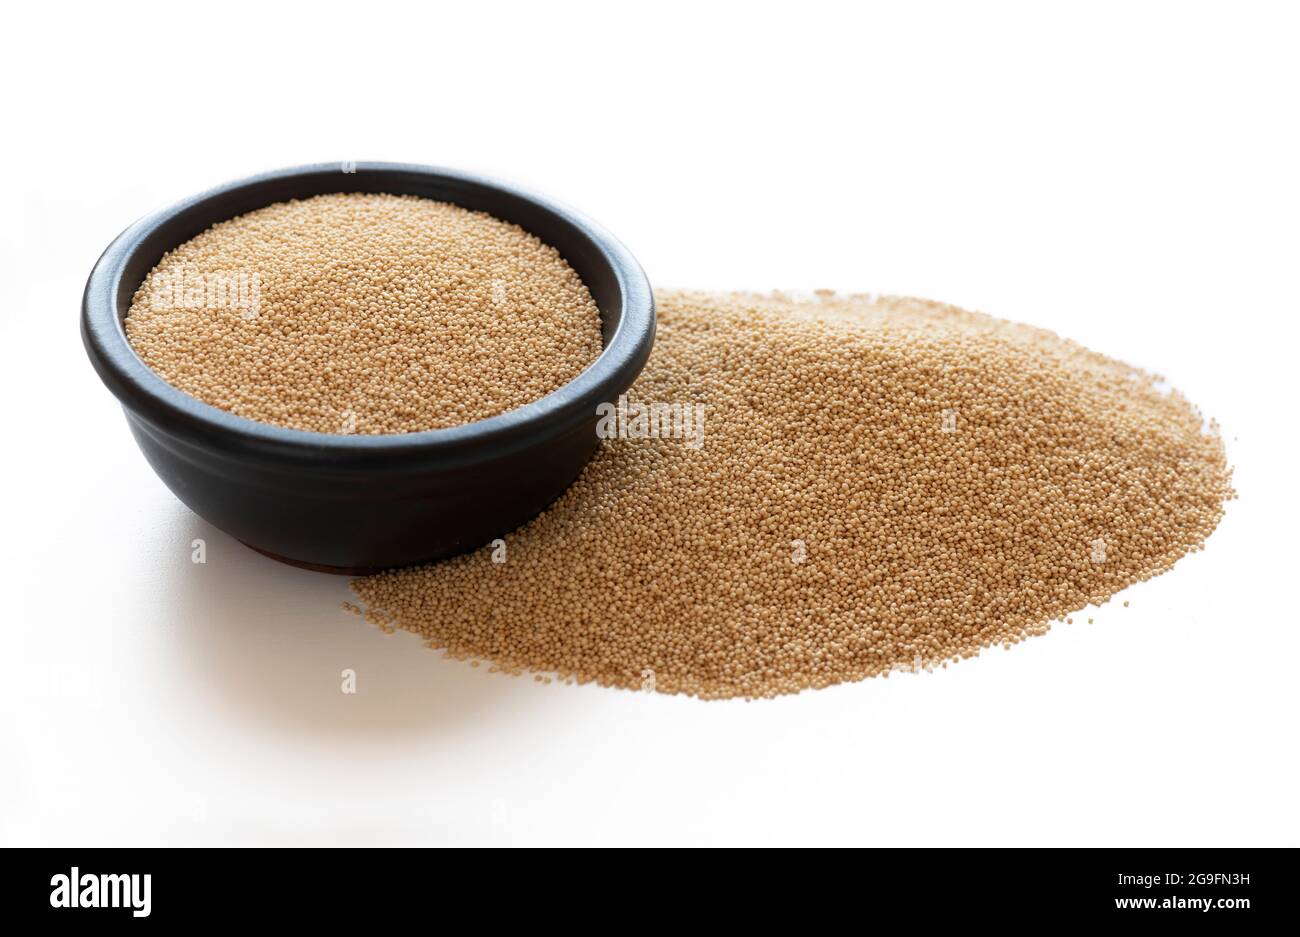 amaranth grain seeds  glutin free and very healthy shown loose and in a ceramic bowl on a white isolated background Stock Photo